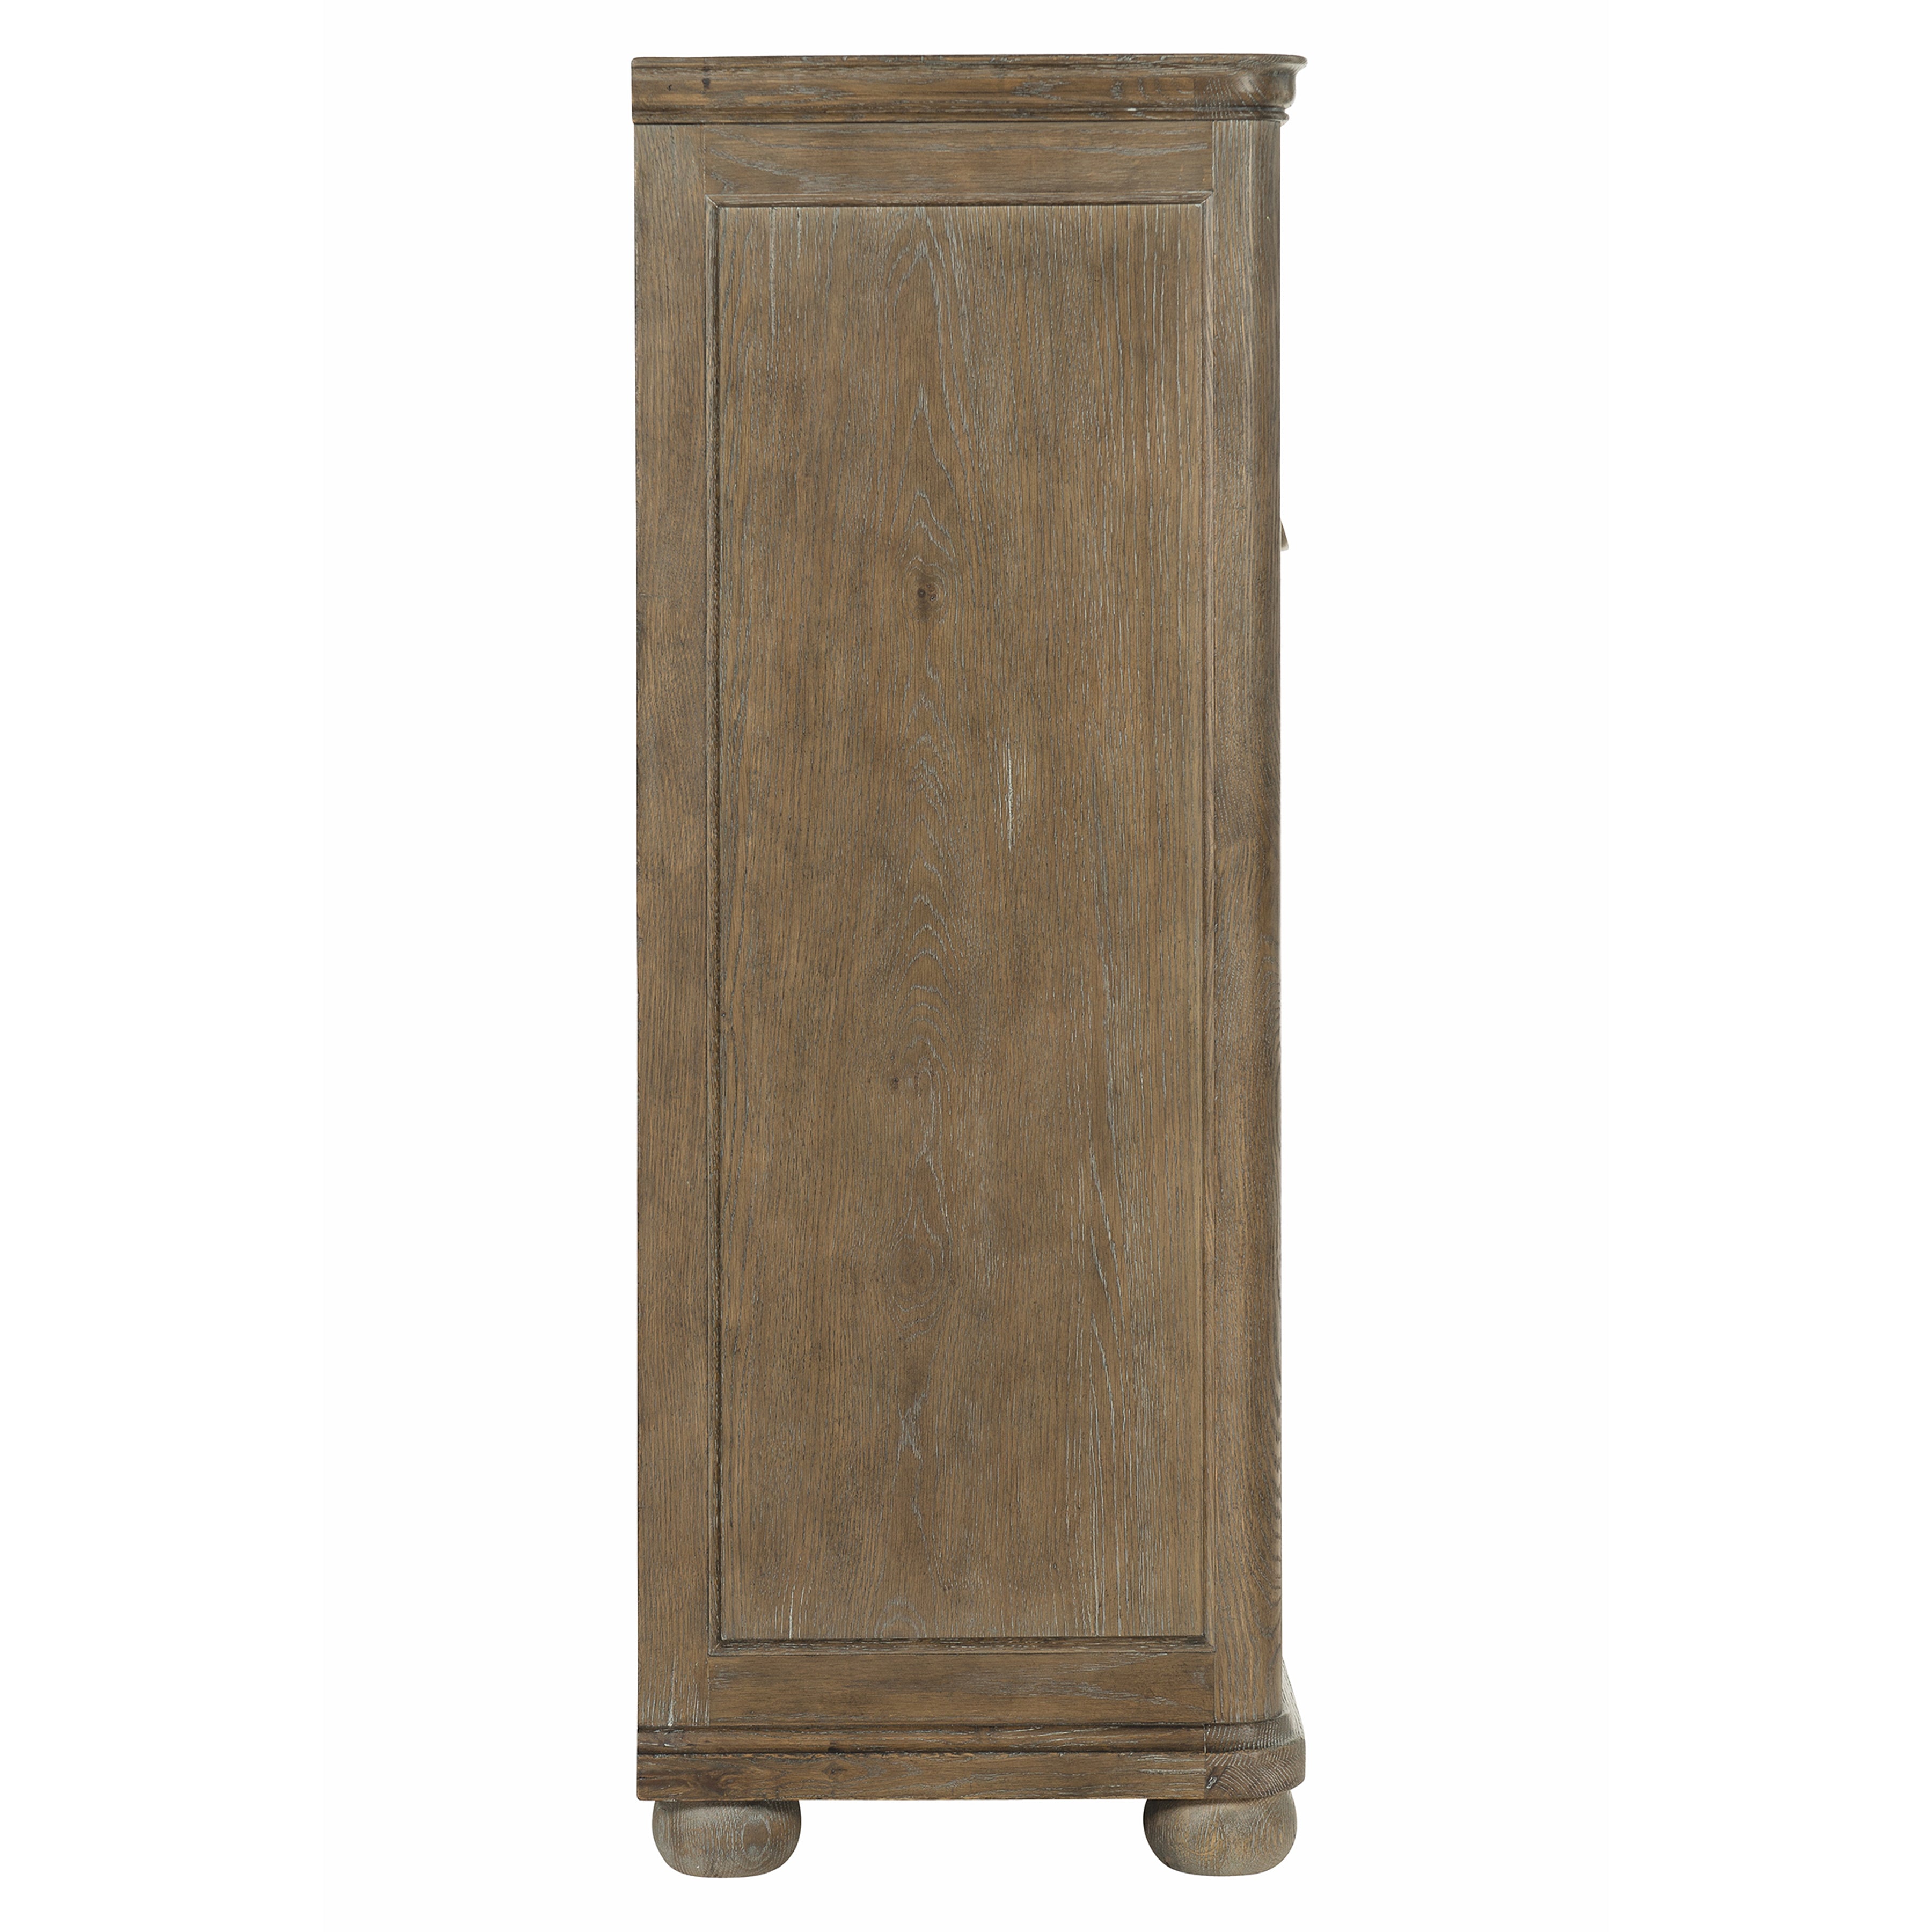 Rustic Patina Drawer Chest in Peppercorn Finish